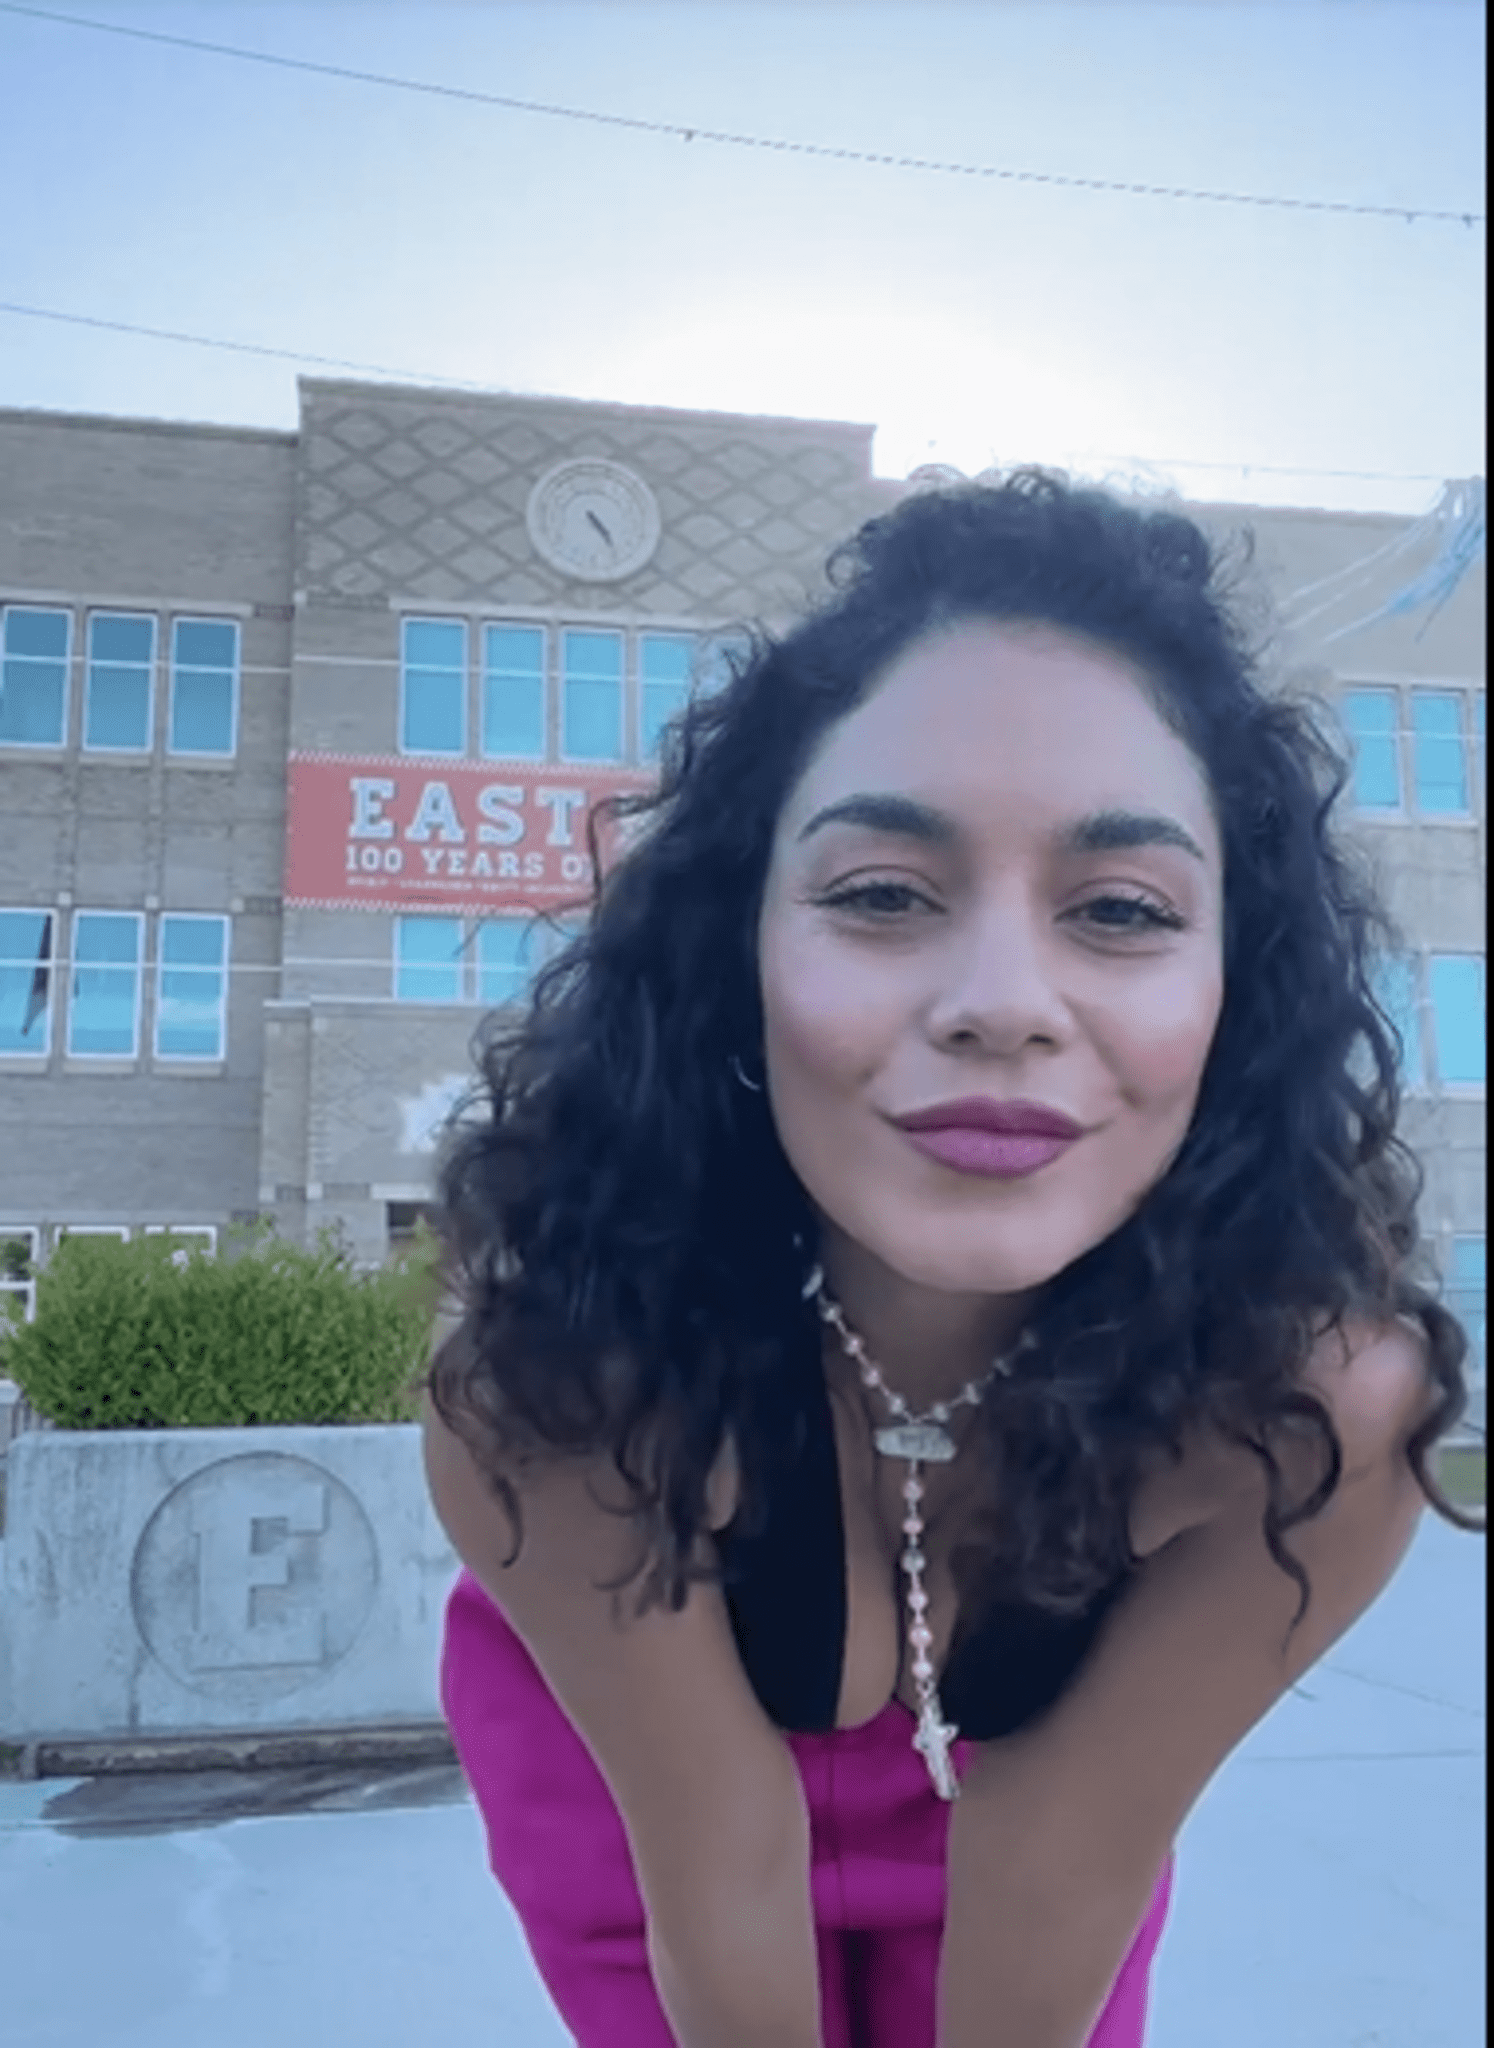 With a June video of herself in front of East High, Vanessa Hudgens sparked speculation that she will be returning to her role as Gabriella Montez.